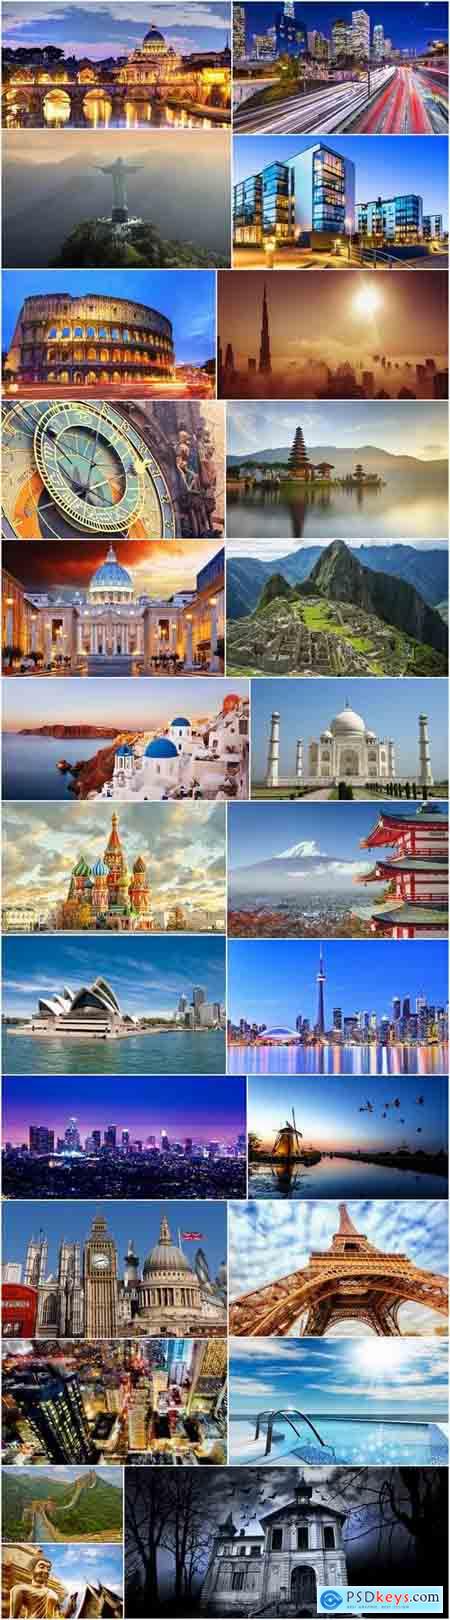 Architecture of different countries skyscraper historical building travel sights 25 HQ Jpeg